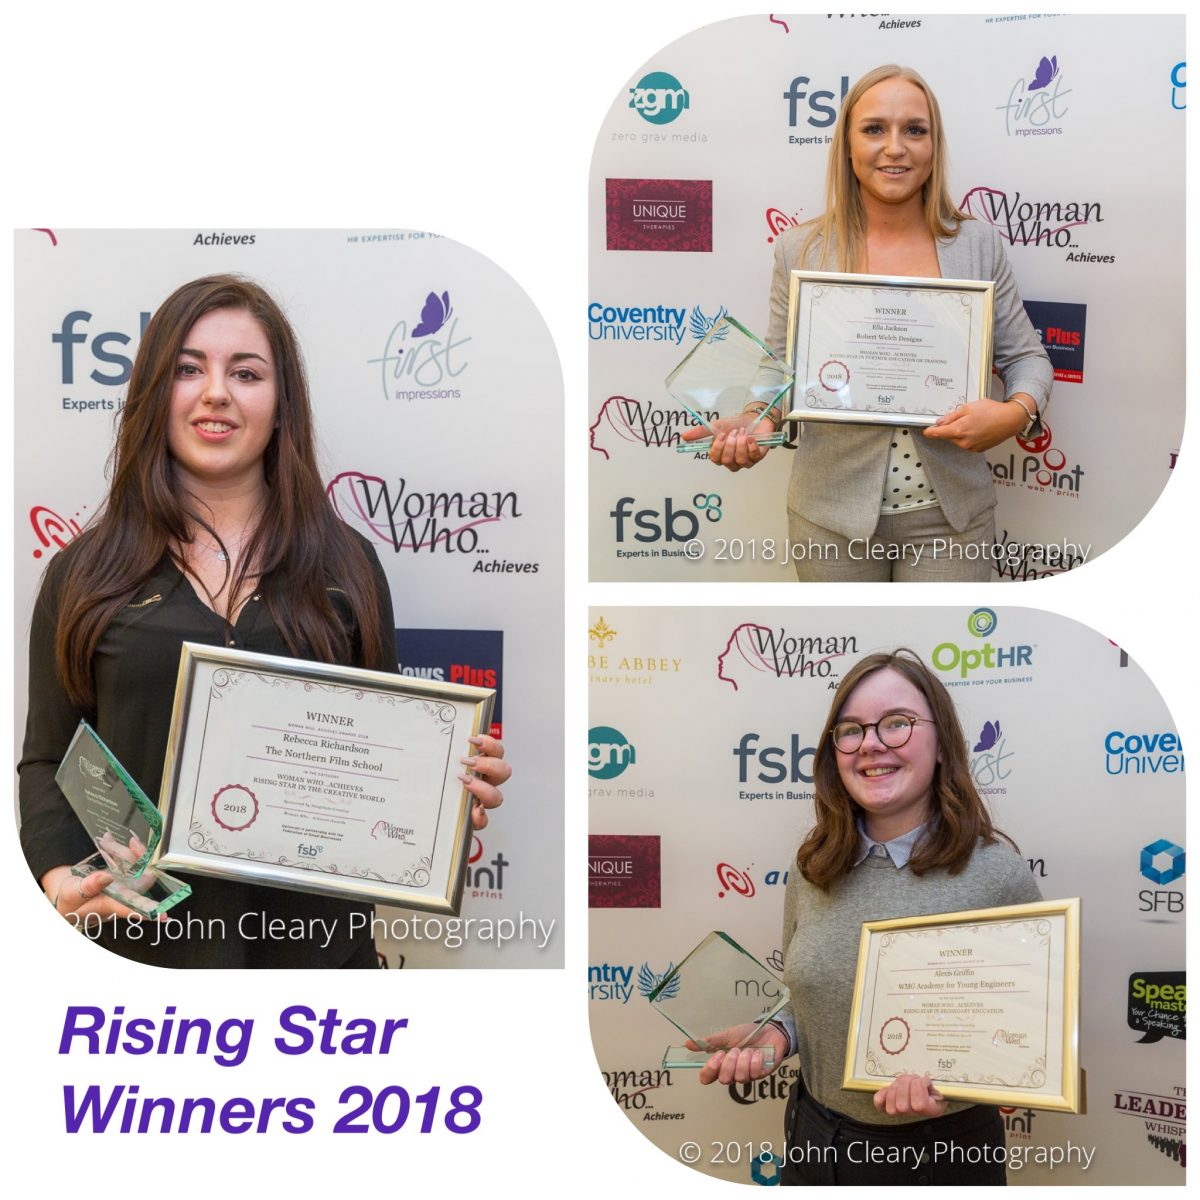 Congratulations to the Woman Who Achieves Rising Star Finalists 2019 Sponsored by Coventry University and Imaginate Creative